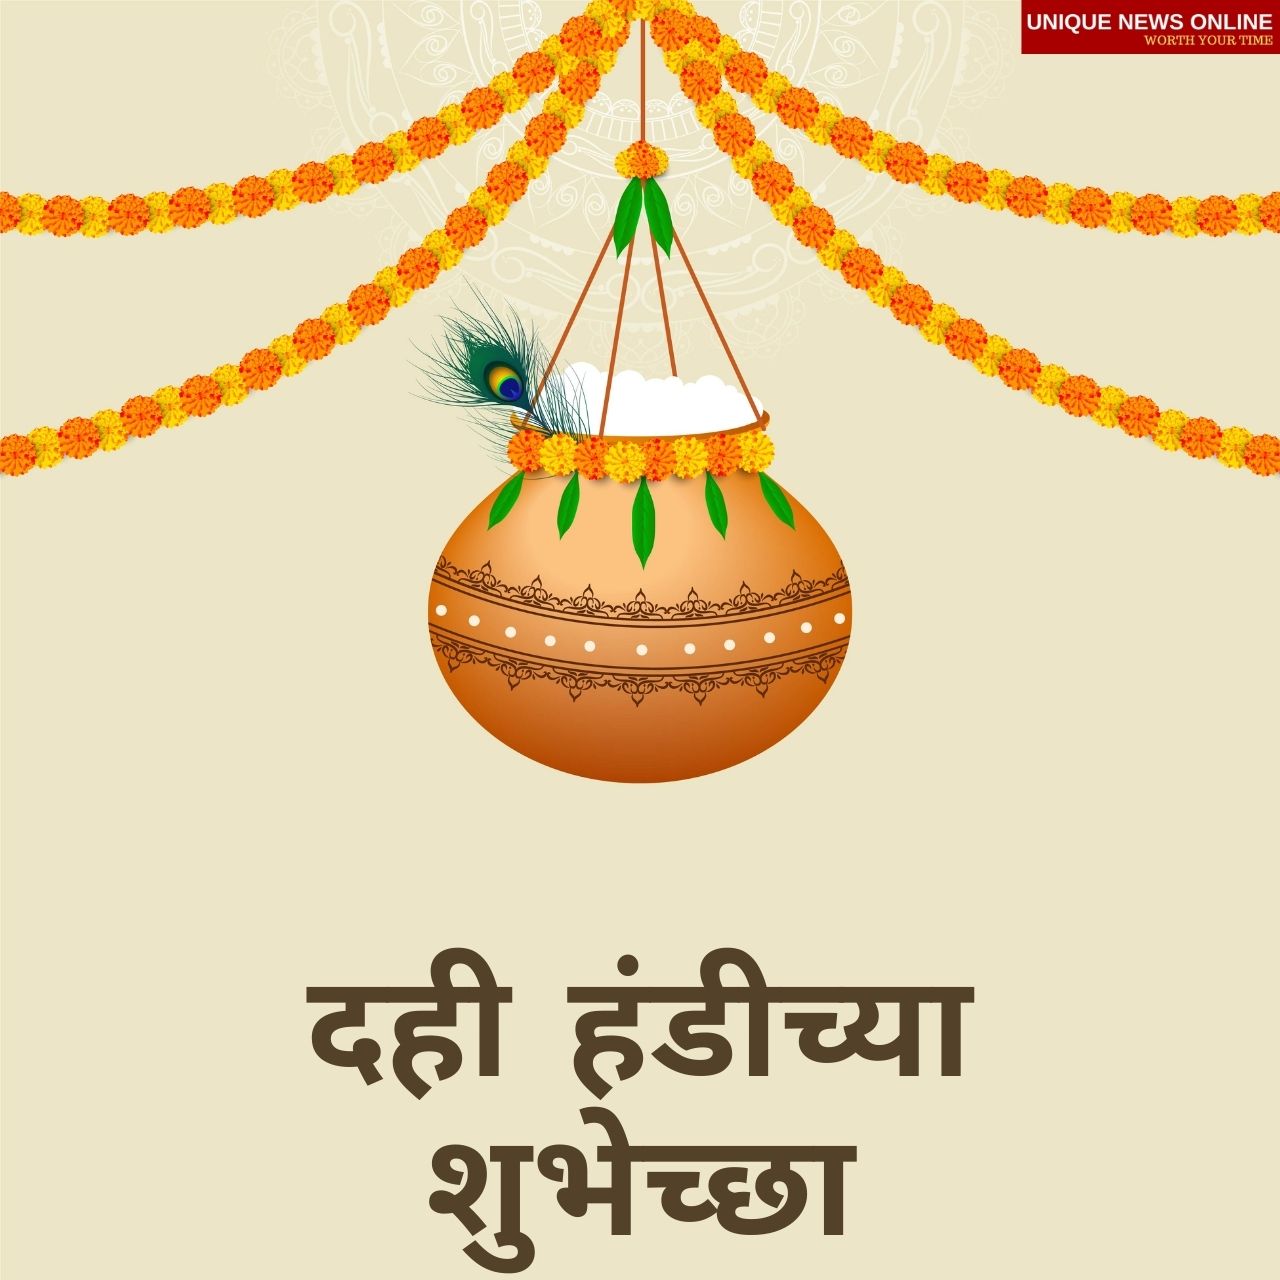 Happy Dahi Handi Marathi Wishes, Images, PNG, Poster, Quotes, Greetings, WhatsApp, and Facebook Messages to Share